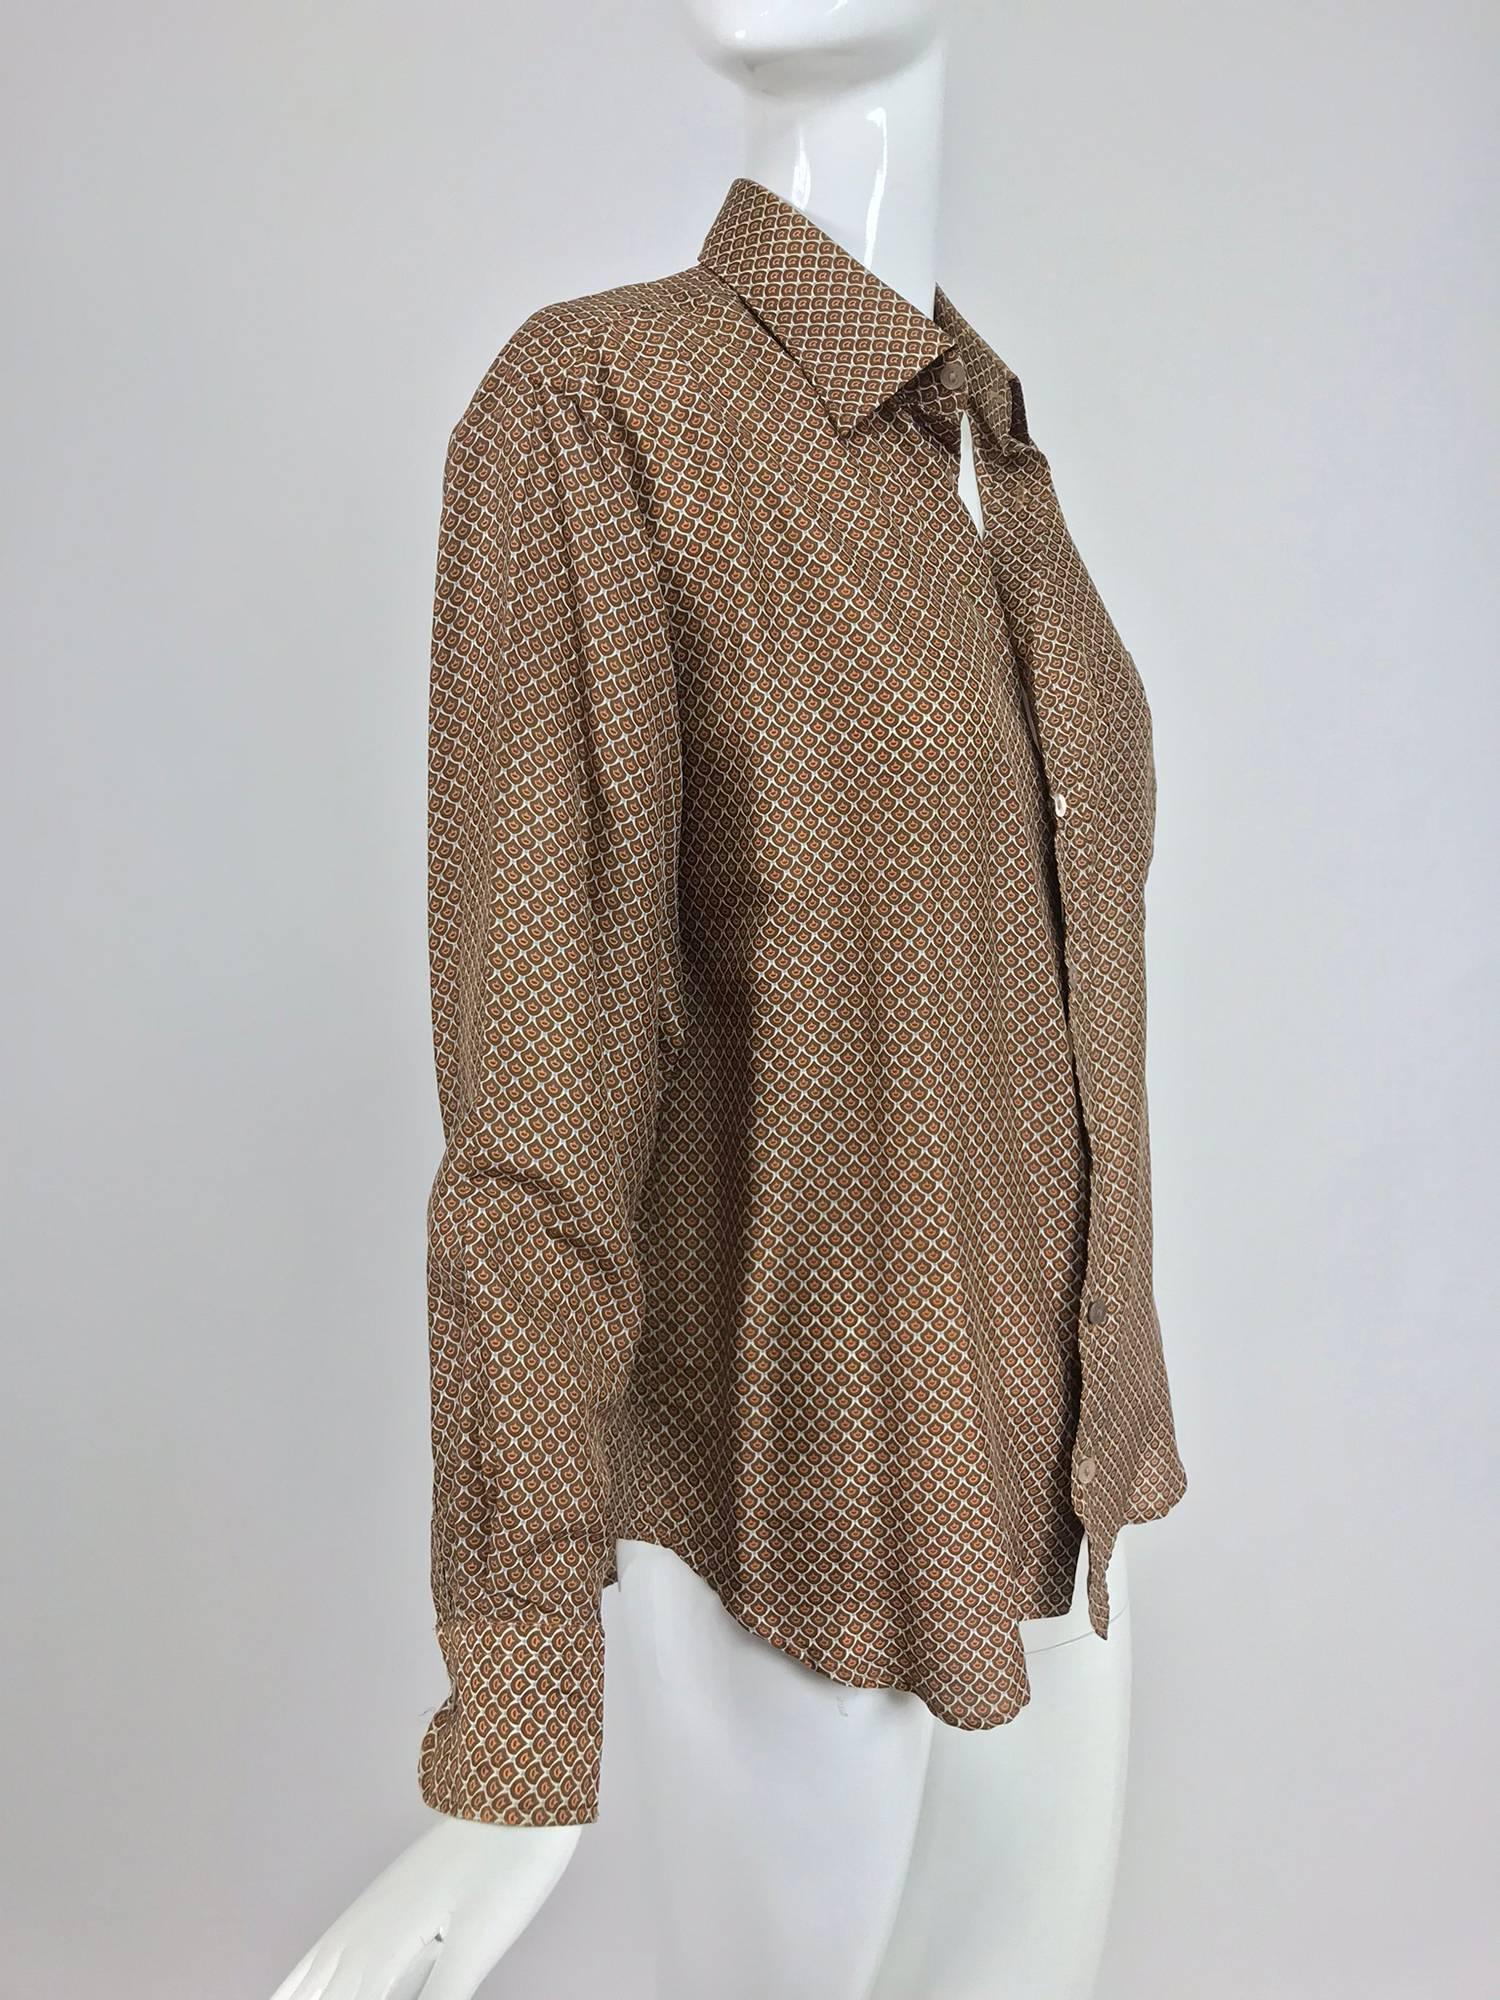 Gucci silk foulard shirt in caramel, cream and blue print from the 1960s...G. Gucci label...Long sleeve button front shirt with banded cuffs, yoke back single chest pocket...Mens shirt marked 15 1/2  39...
In excellent wearable condition... All our